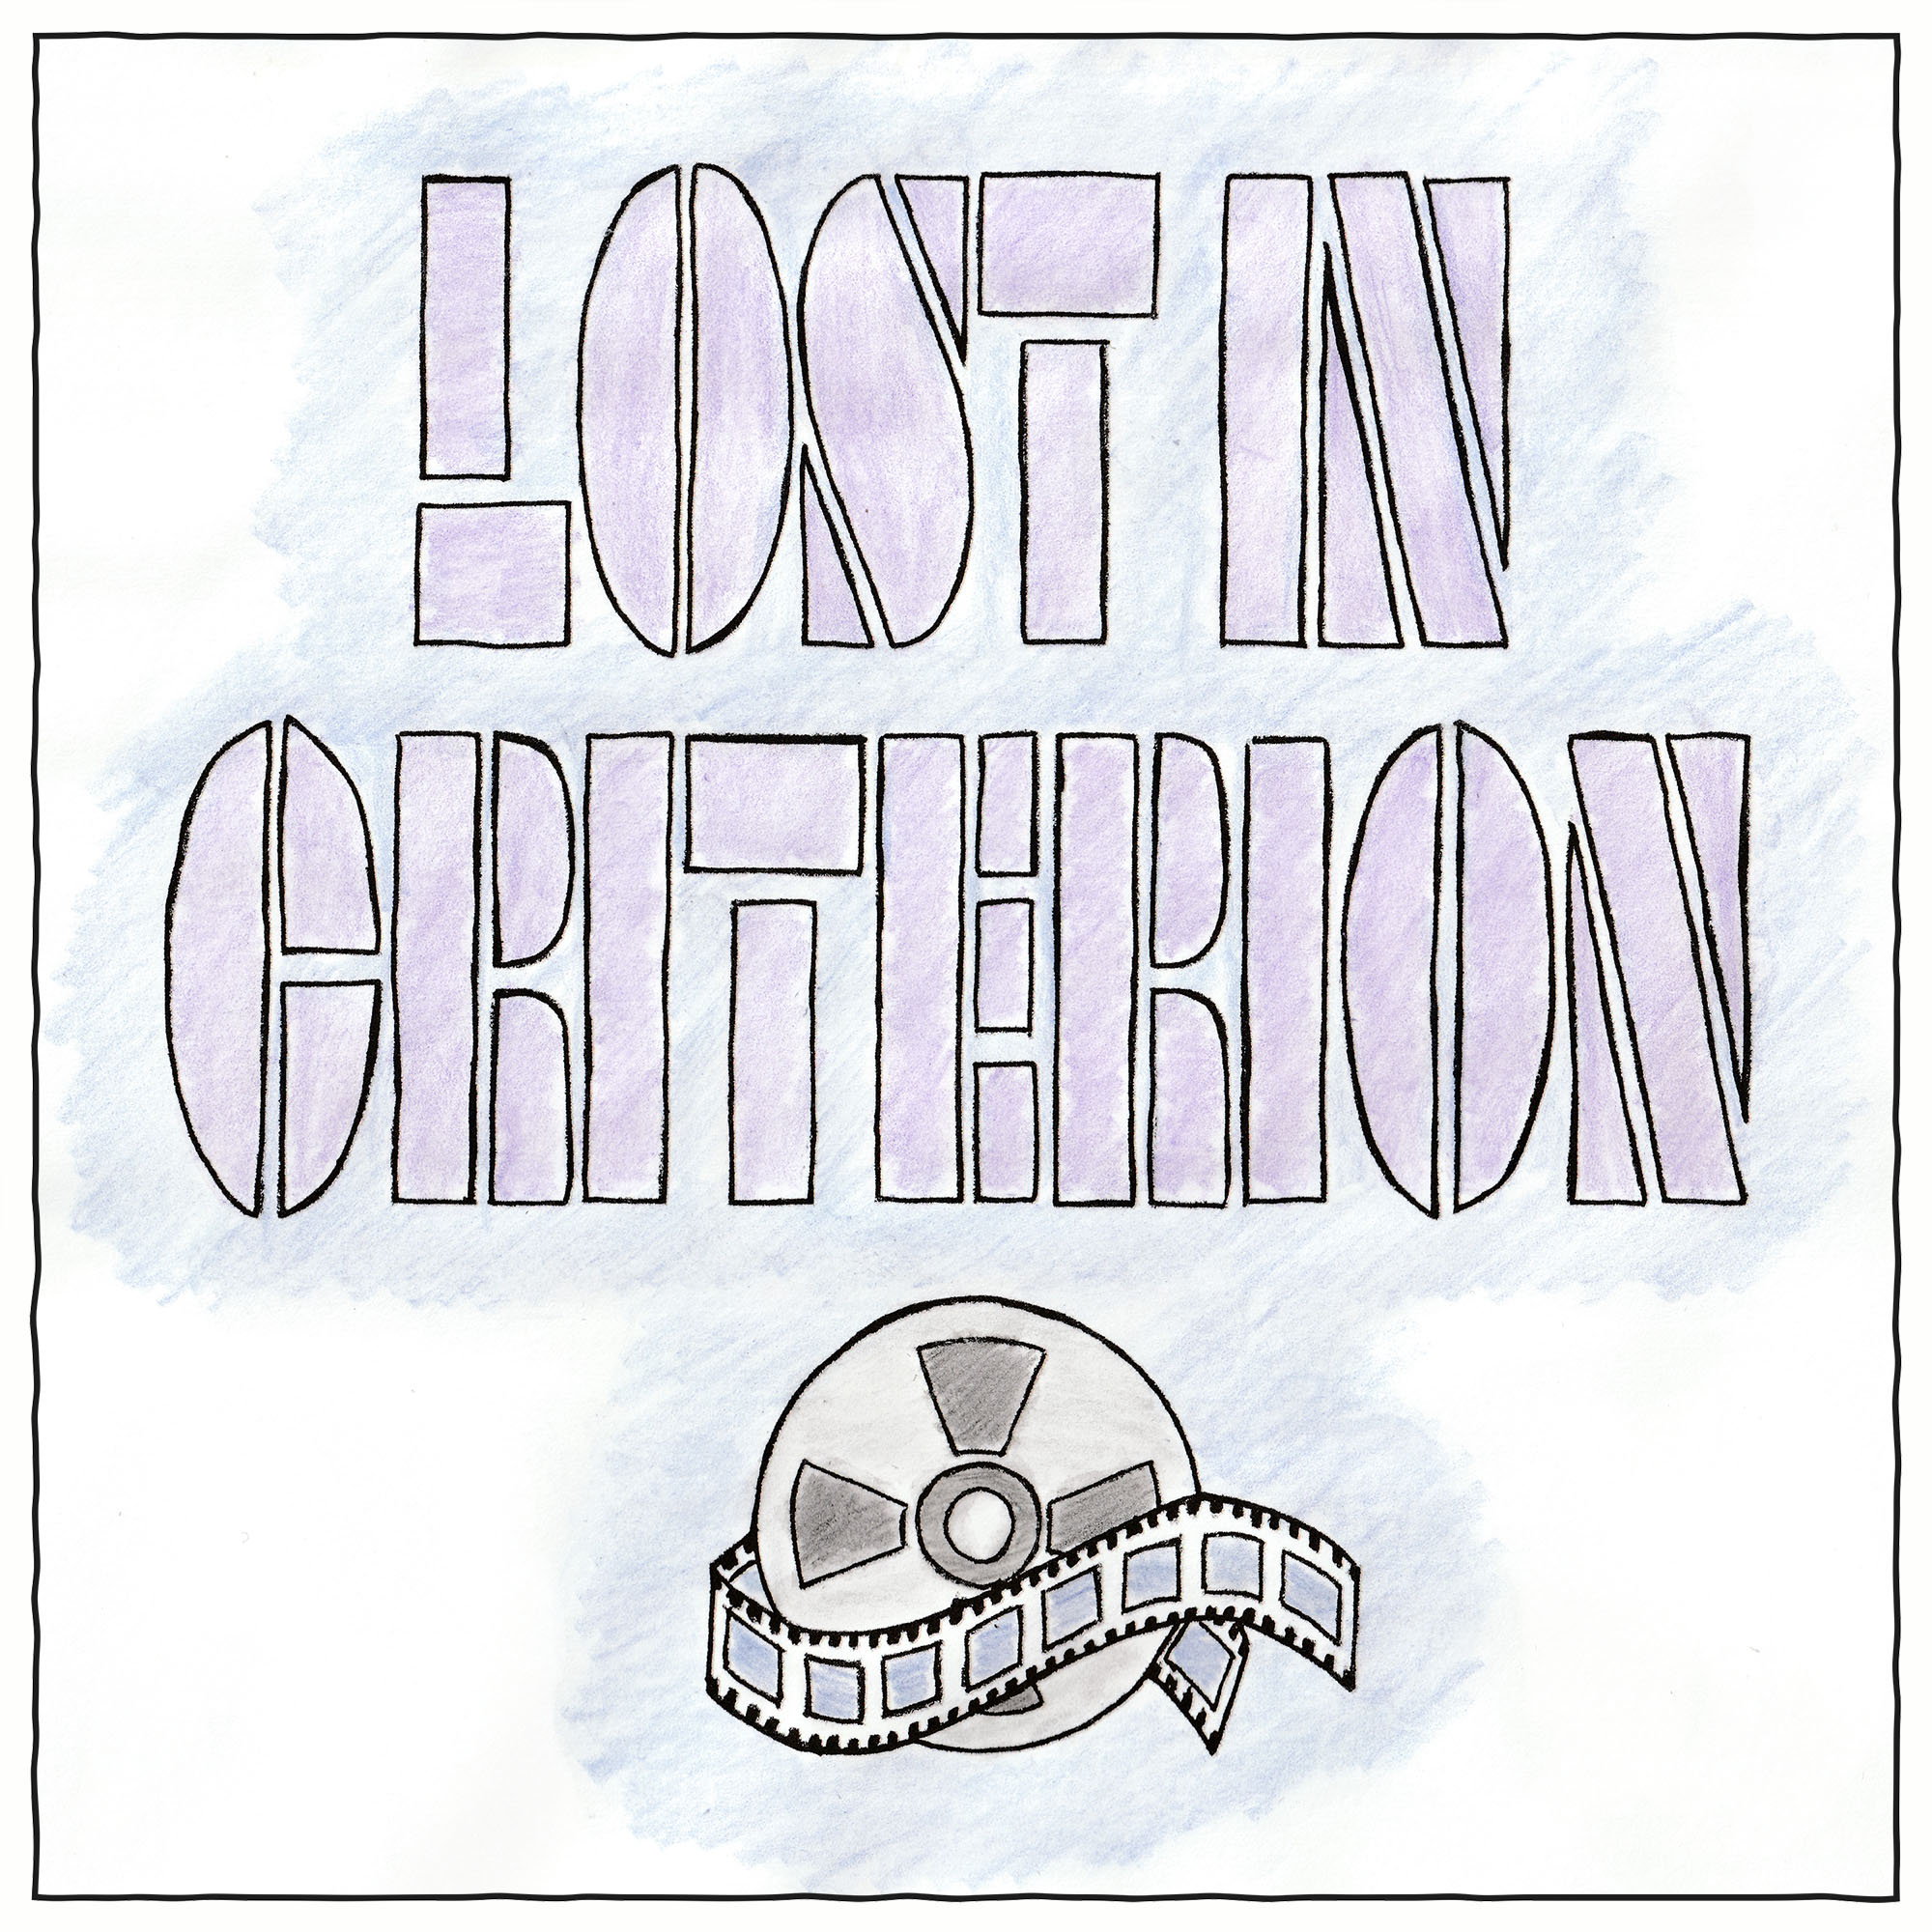 Lost in Criterion